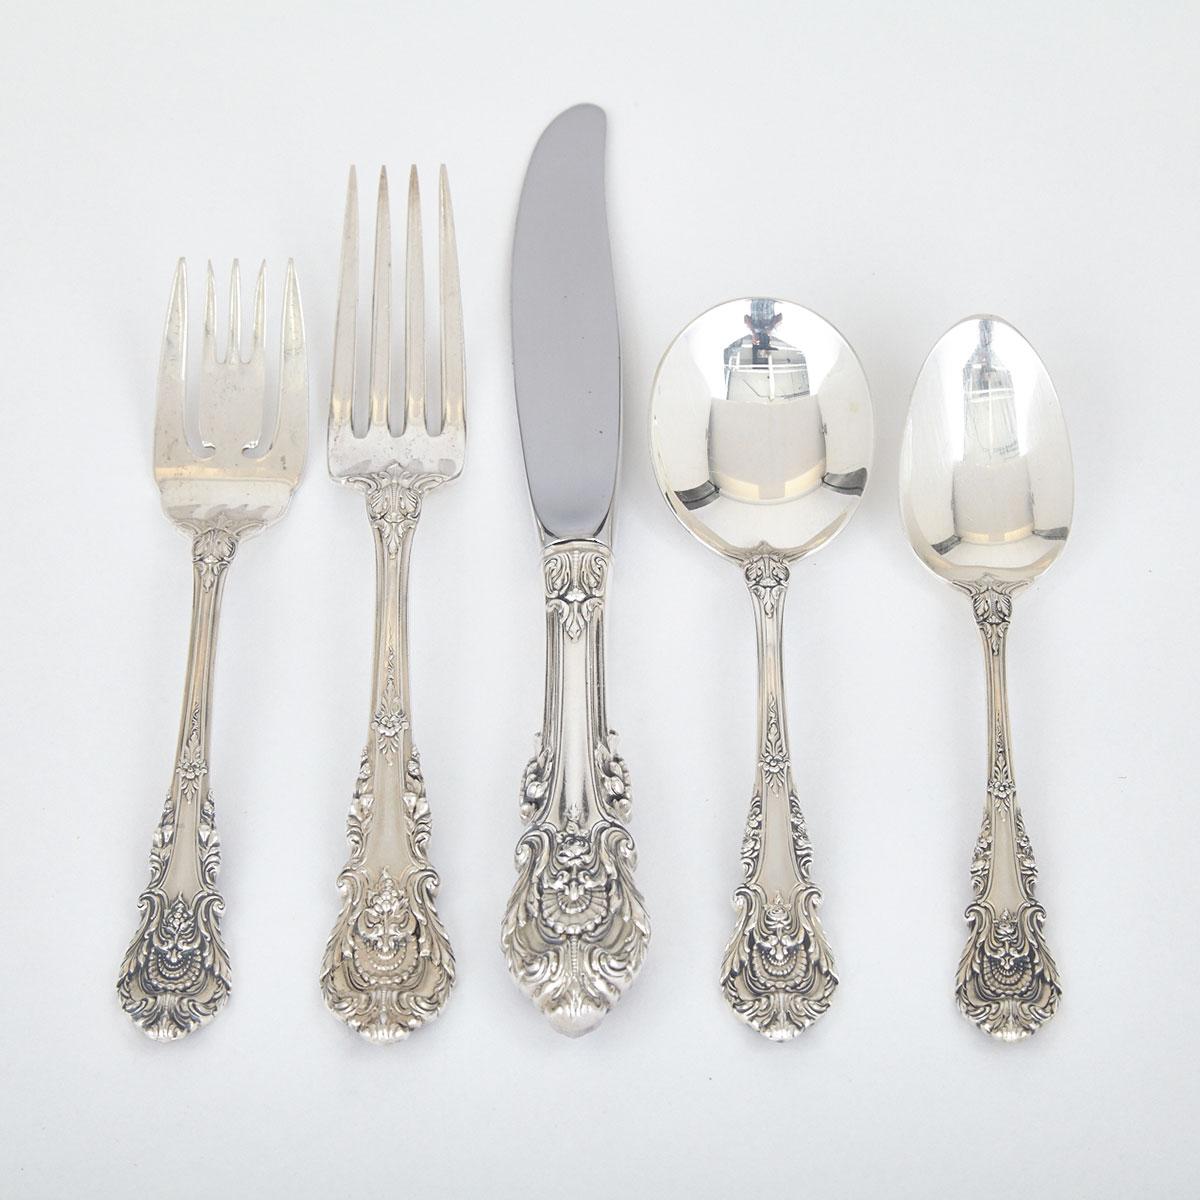 American Silver ‘Sir Christopher’ Pattern Flatware Service, Wallace Silversmiths, Wallingford, Ct., 20th century 